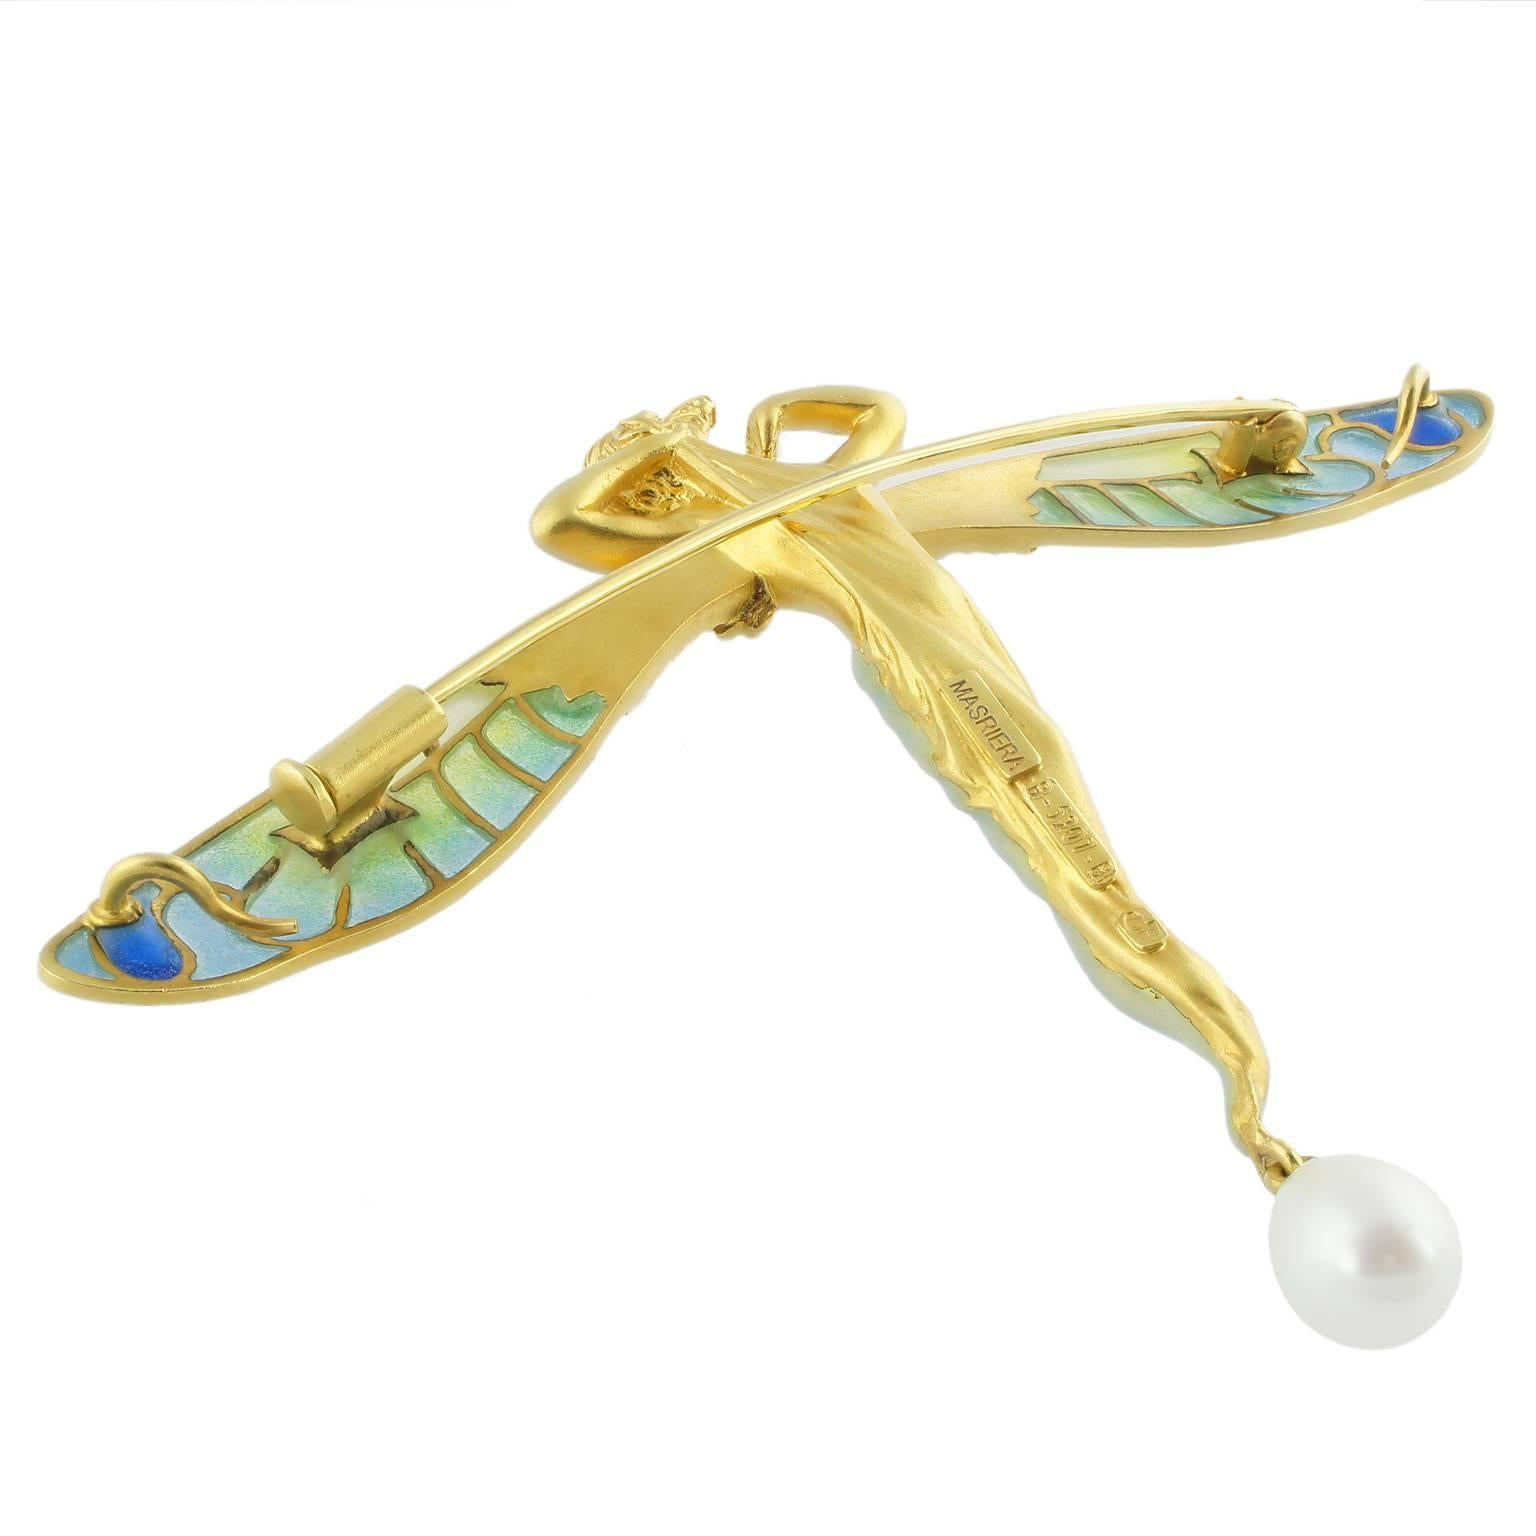 Masriera Art Nouveau brooch-pendant shaped as a nymph in gold and enamel, decorated with plique-à-jour and a pearl.